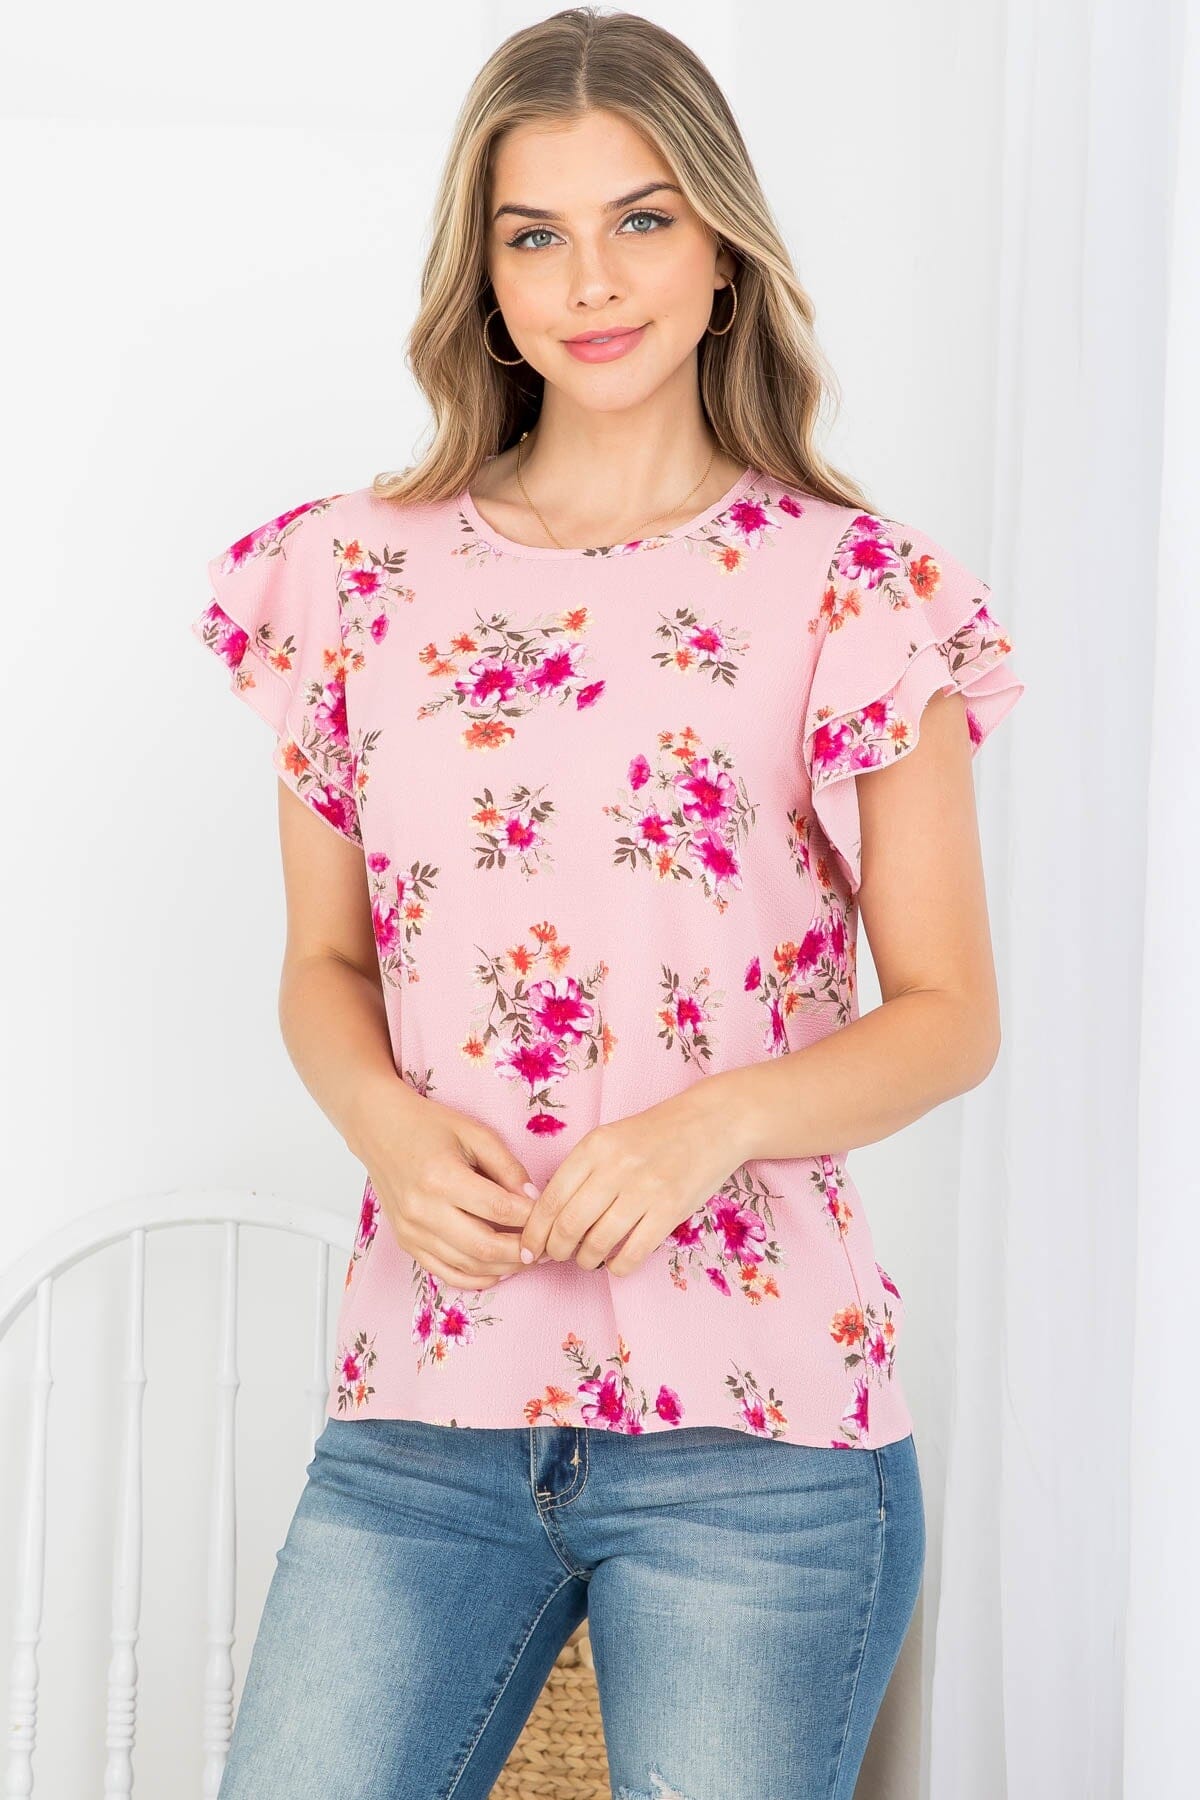 Womens Pink Rose Floral Top, Ruffle Flutter Sleeve Summer Blouse Tops MomMe and More 